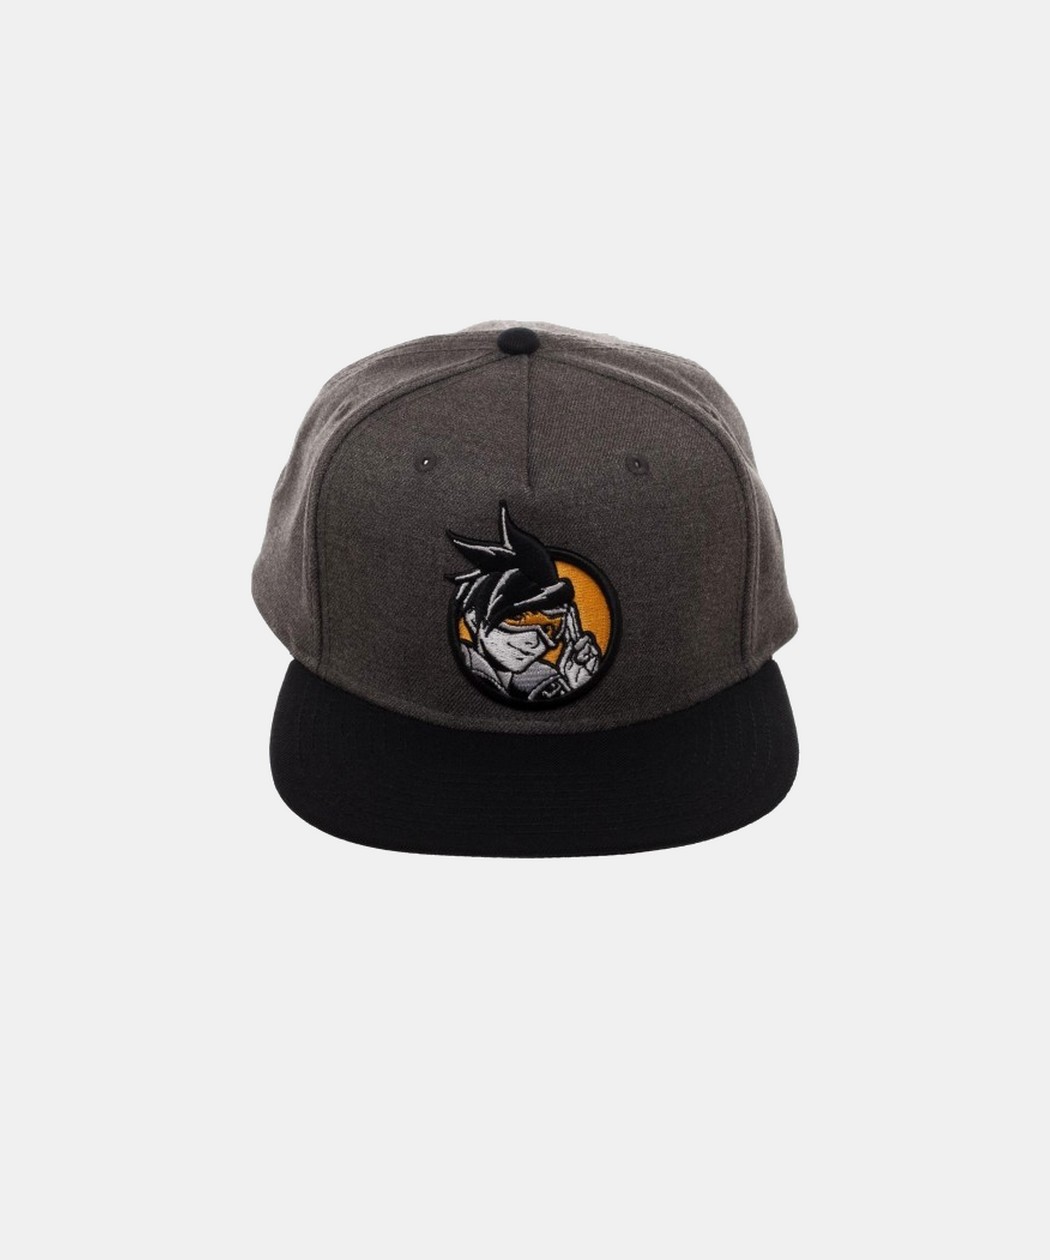 Casquette Snapback Overwatch Tracer